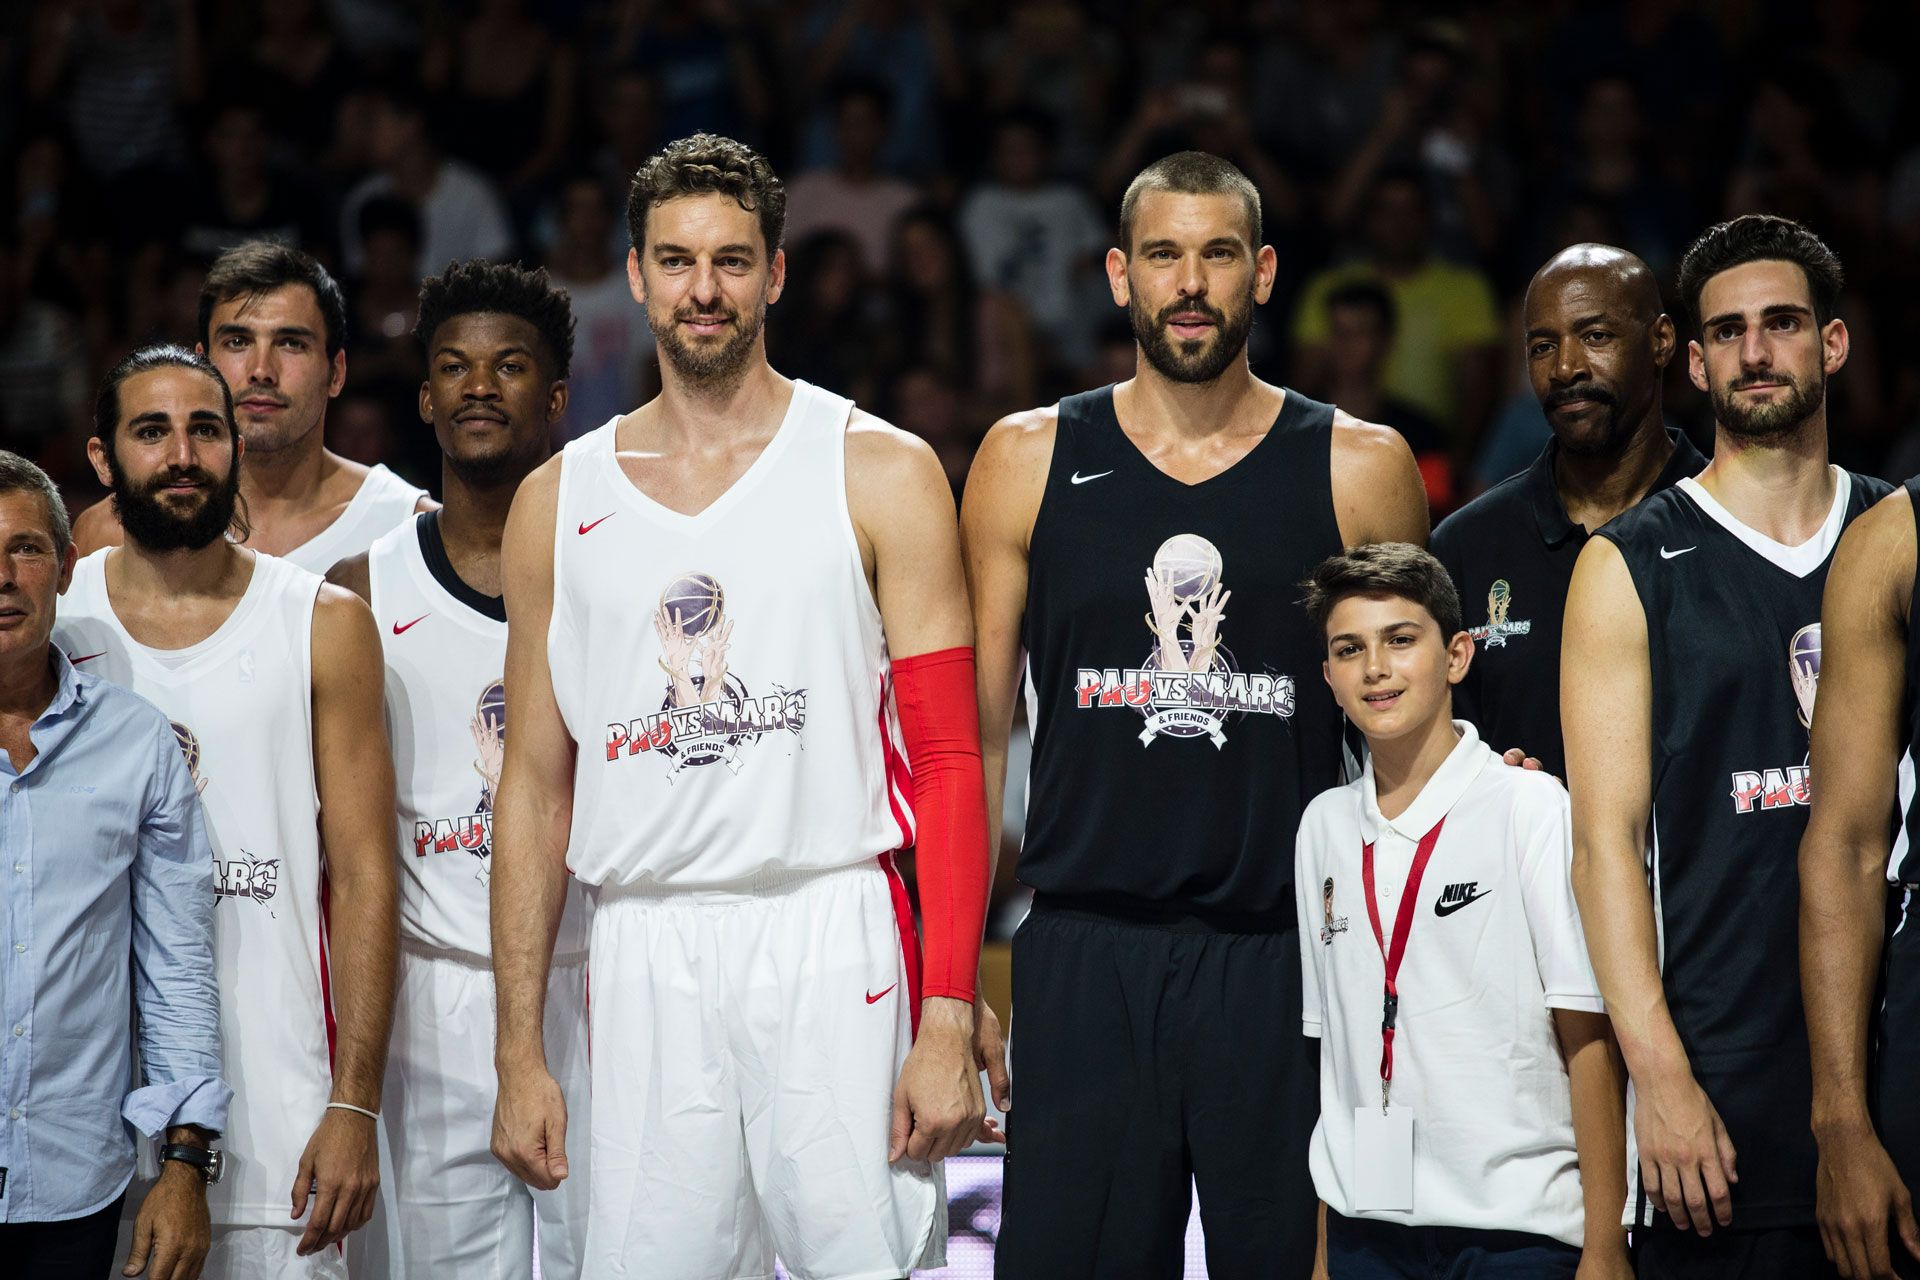 Pau Gasol from Spain of San Antonio Spurs and Marc Gasol from Spain of Memphis Grizzlies during the charity and friendly match Pau Gasol vs Marc Gasol, with European and American NBA players to help young basketball players and developing teams in Fontajau Pavillion, Girona on 8 of July of 2018.